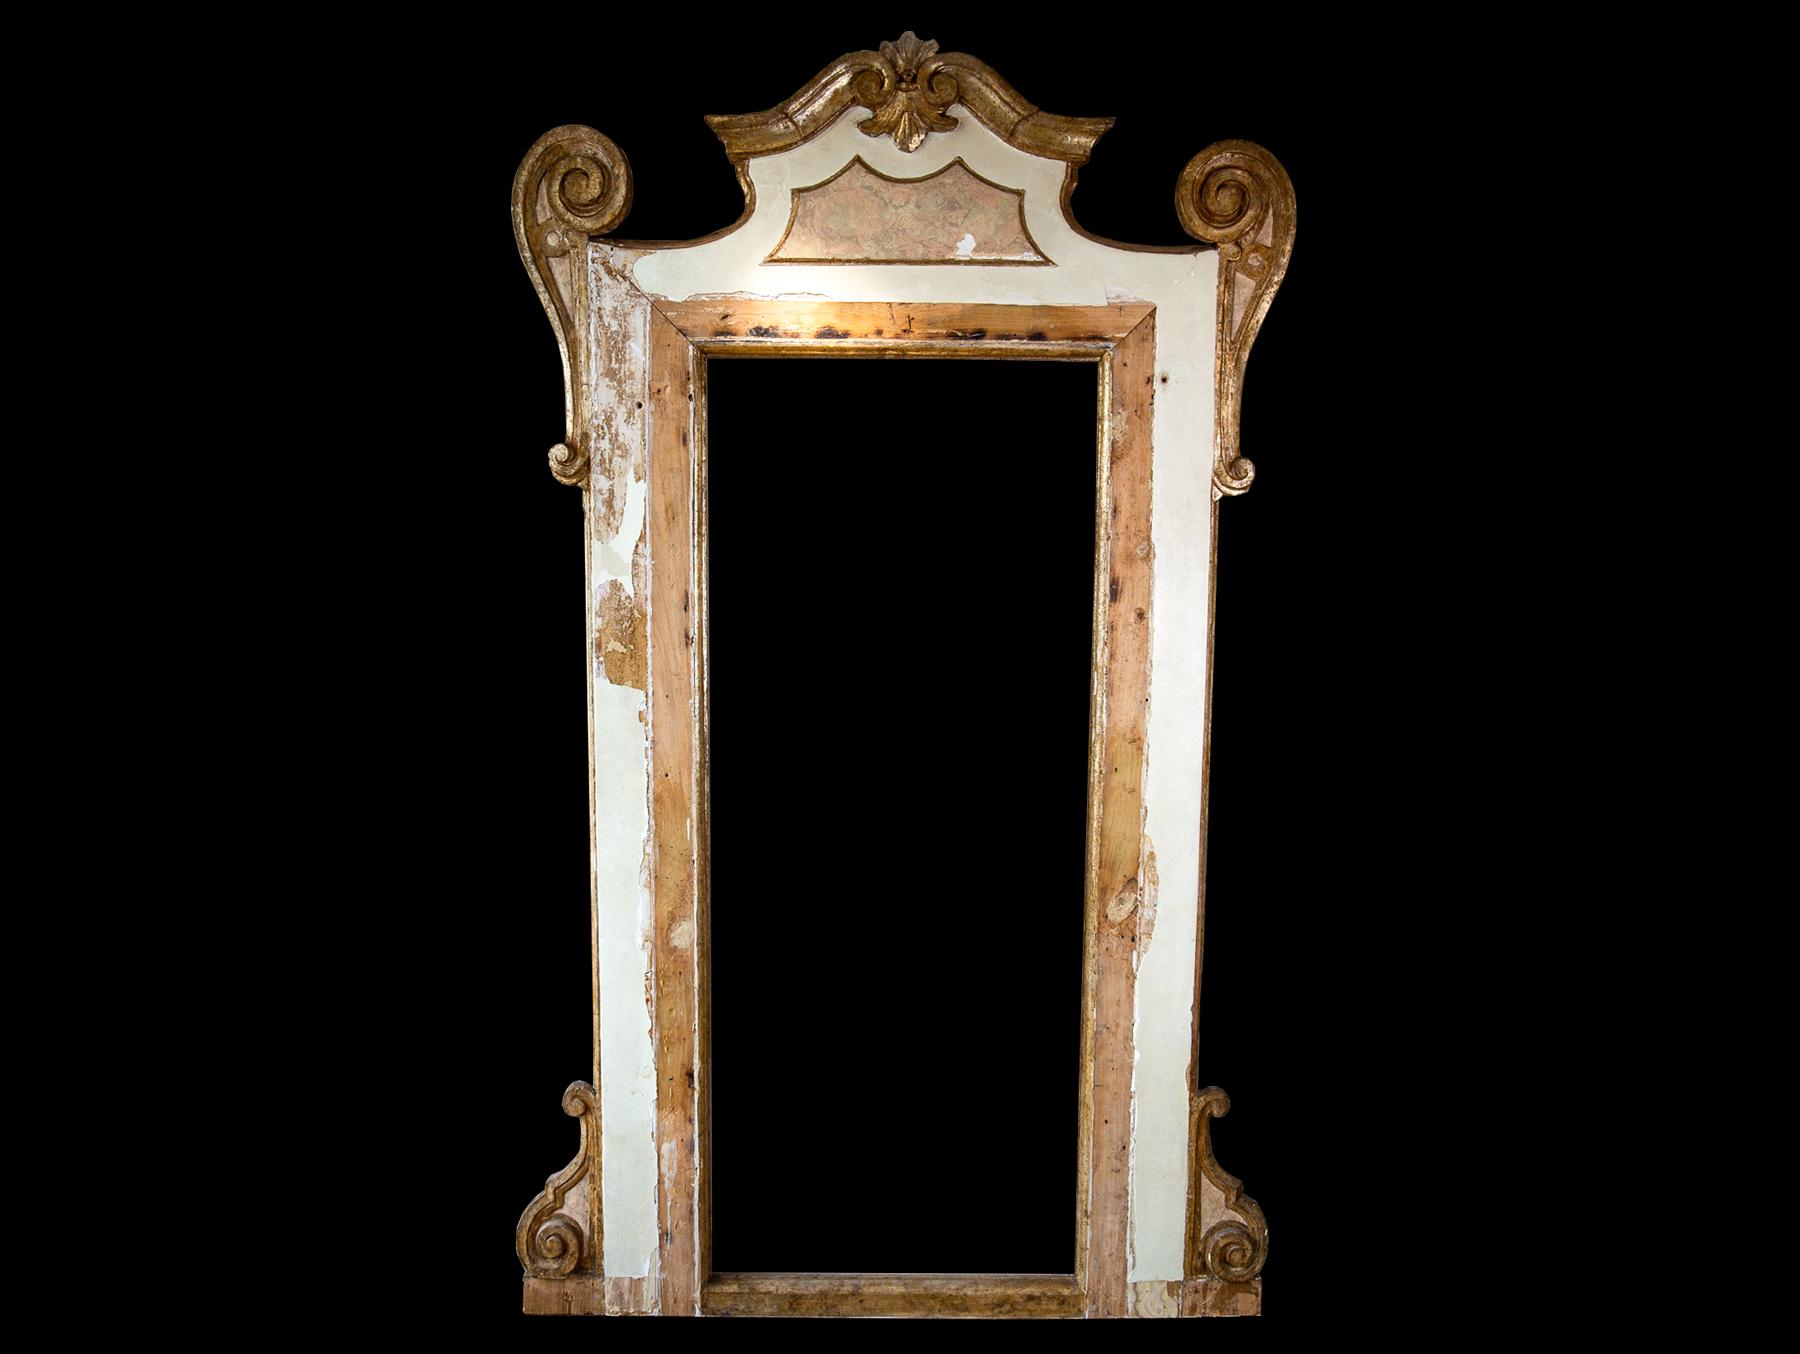 Northern Italy, early 18th century 

With feature generously proportioned gilded scrolls surmounted with an acanthus leaf crest motif. Would be stunning if re-appropriated as a full height mirror.

Dimensions: Max H 250cm x Max W 150cm x D